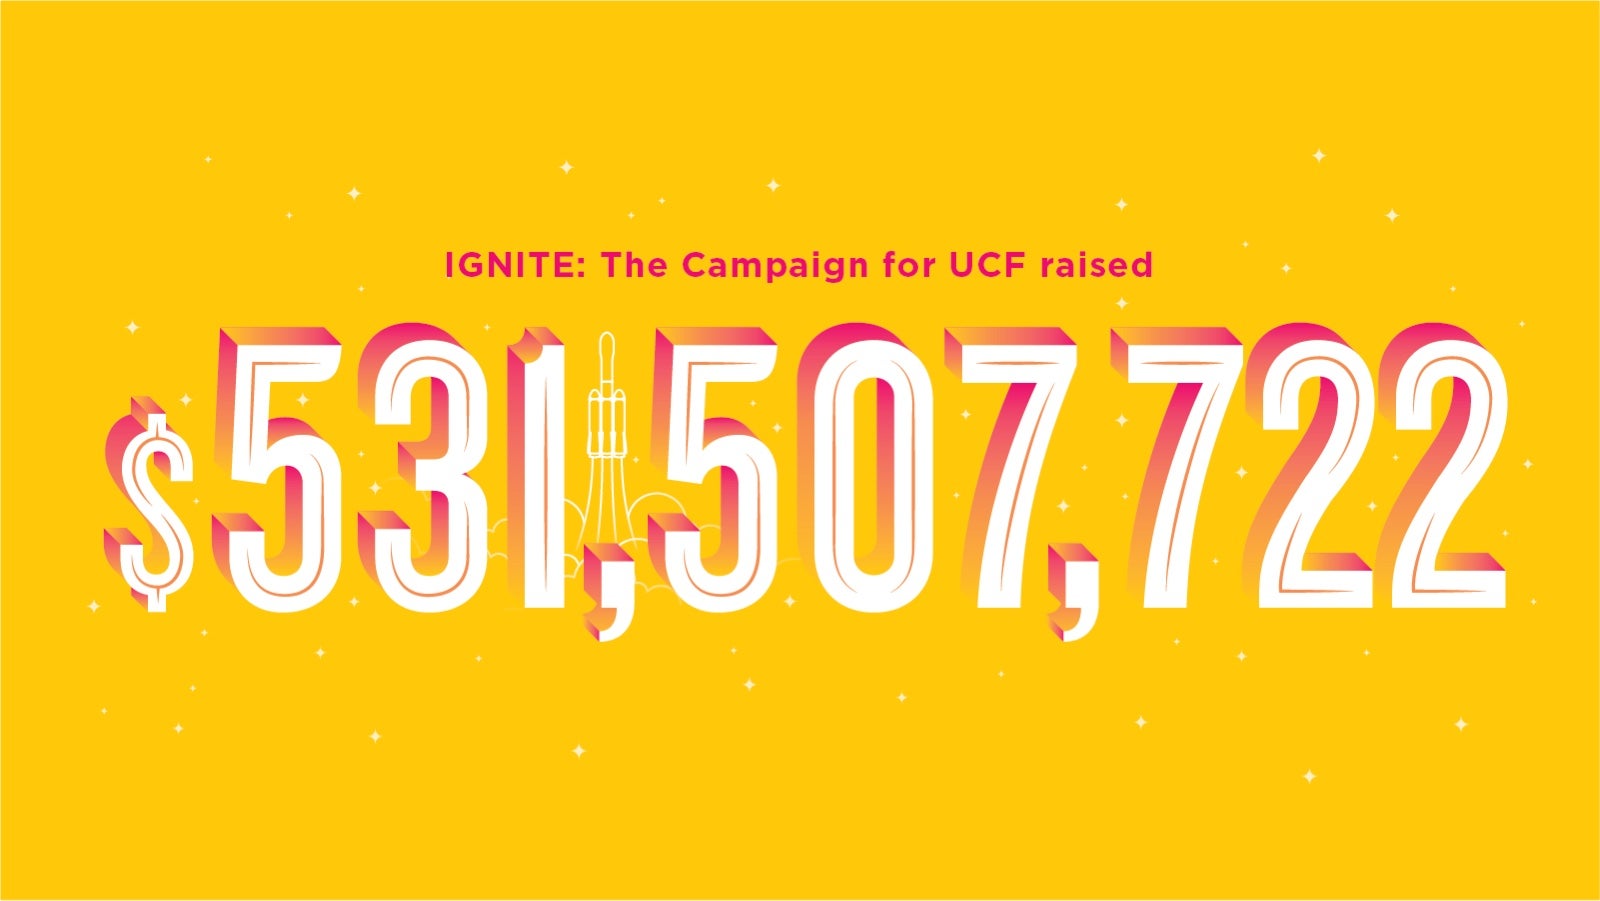 IGNITE: The Campaign for UCF raised $531,507,722